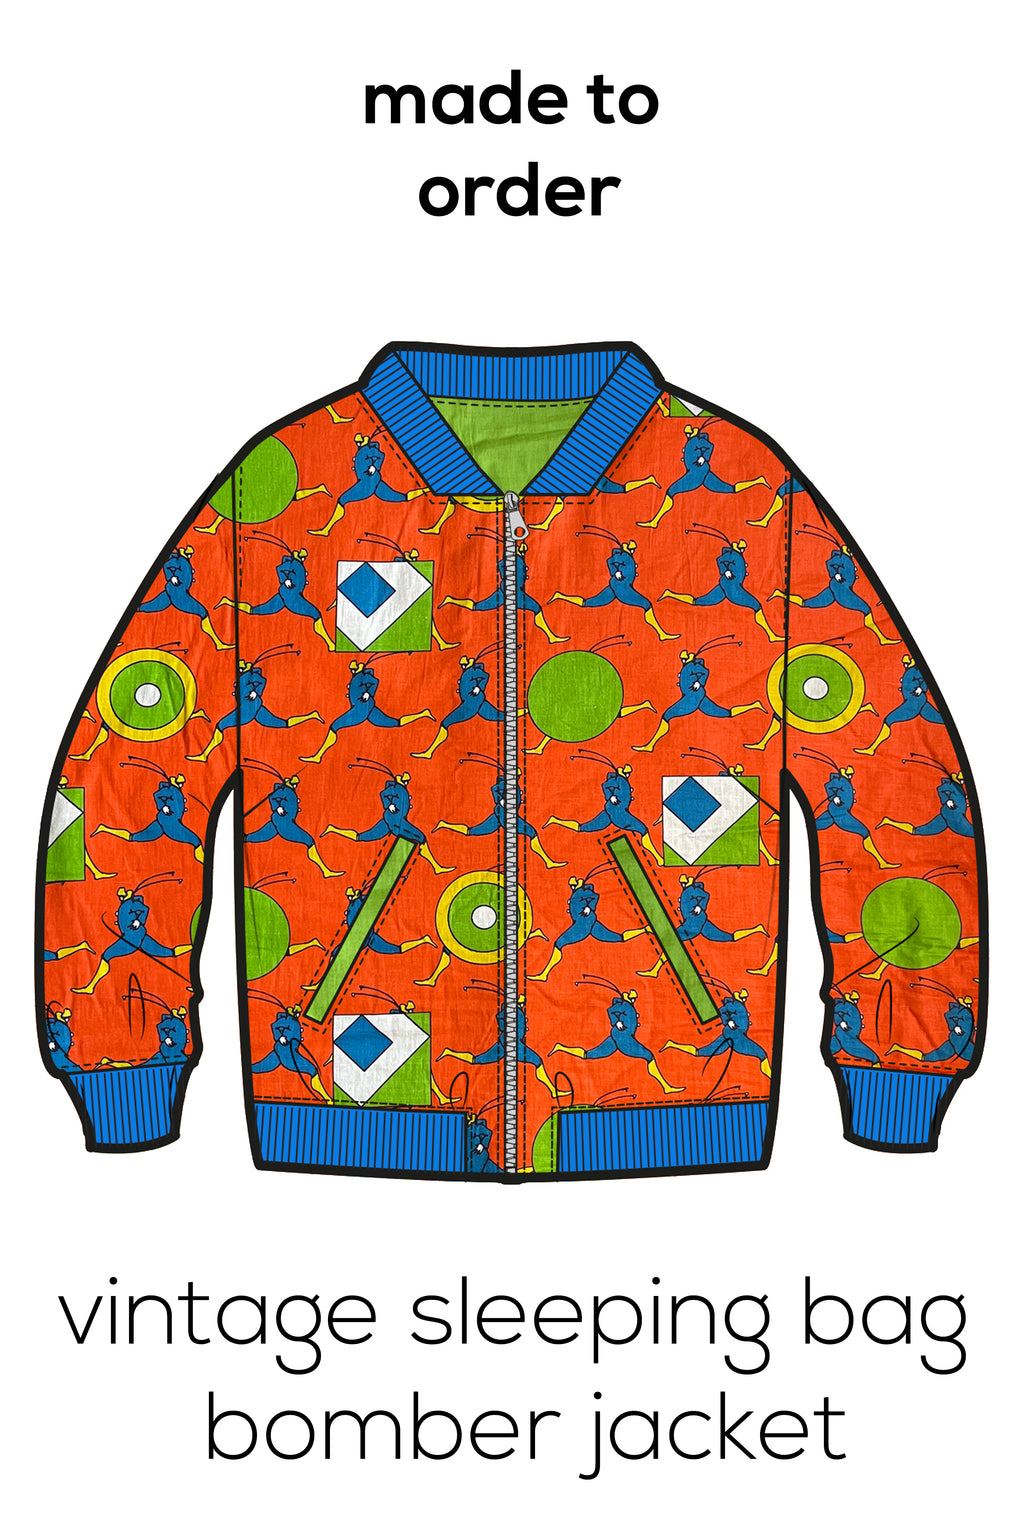 Made To Order - Vintage Sleeping Bag Bomber Jacket, Peter Max "Cosmic Clown" size XS - XXL